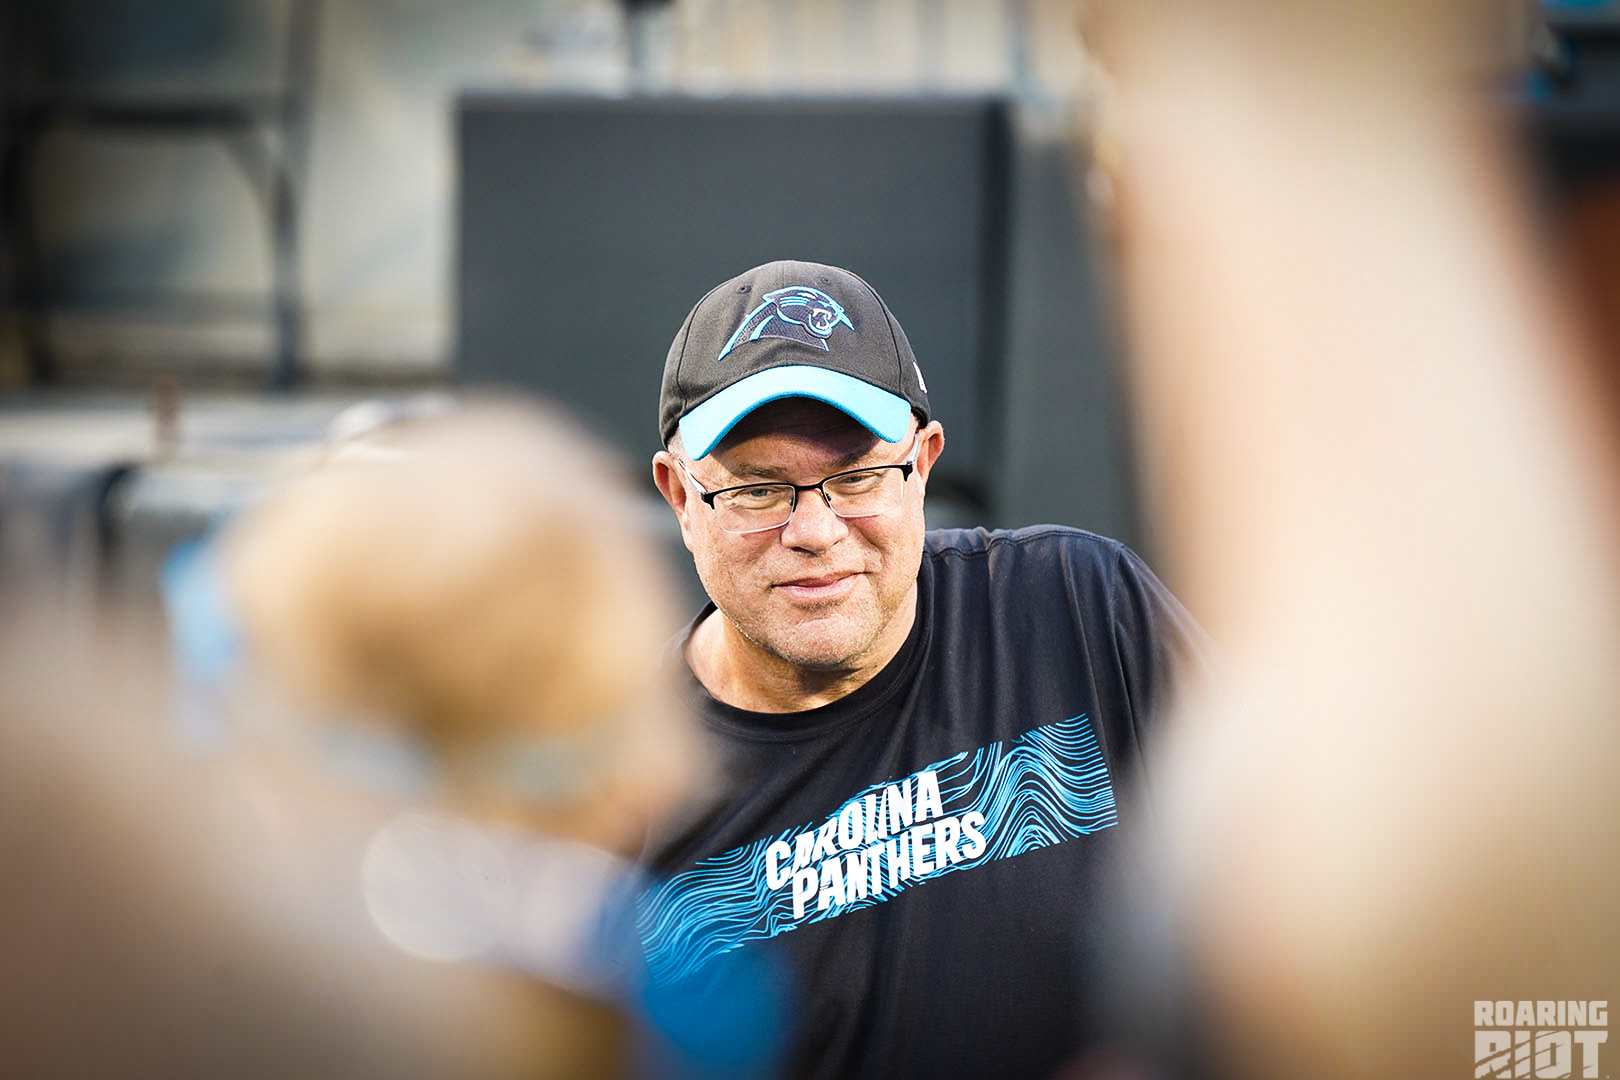 As South Carolina Vote Looms, Tepper Says He’s Content To Practice In Charlotte